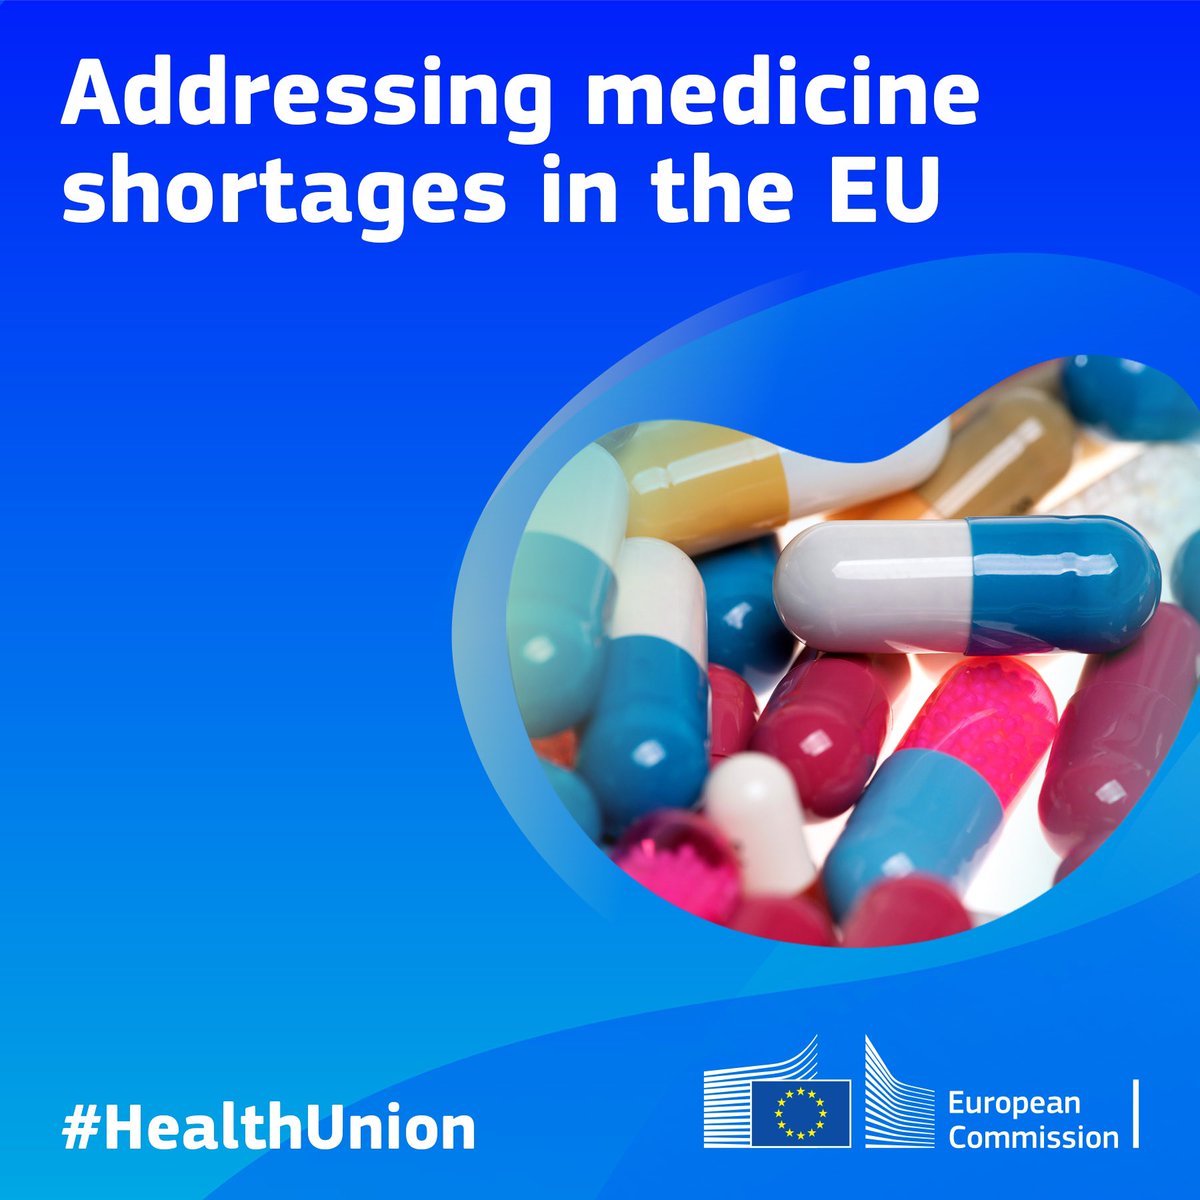 In a strong #HealthUnion, every citizen must have access to the essential medicines they need at all times. We need a new 🇪🇺 approach to better tackle medicines shortages. The actions we put forward today aim to strengthen our medicines supply chains, now and for the future.